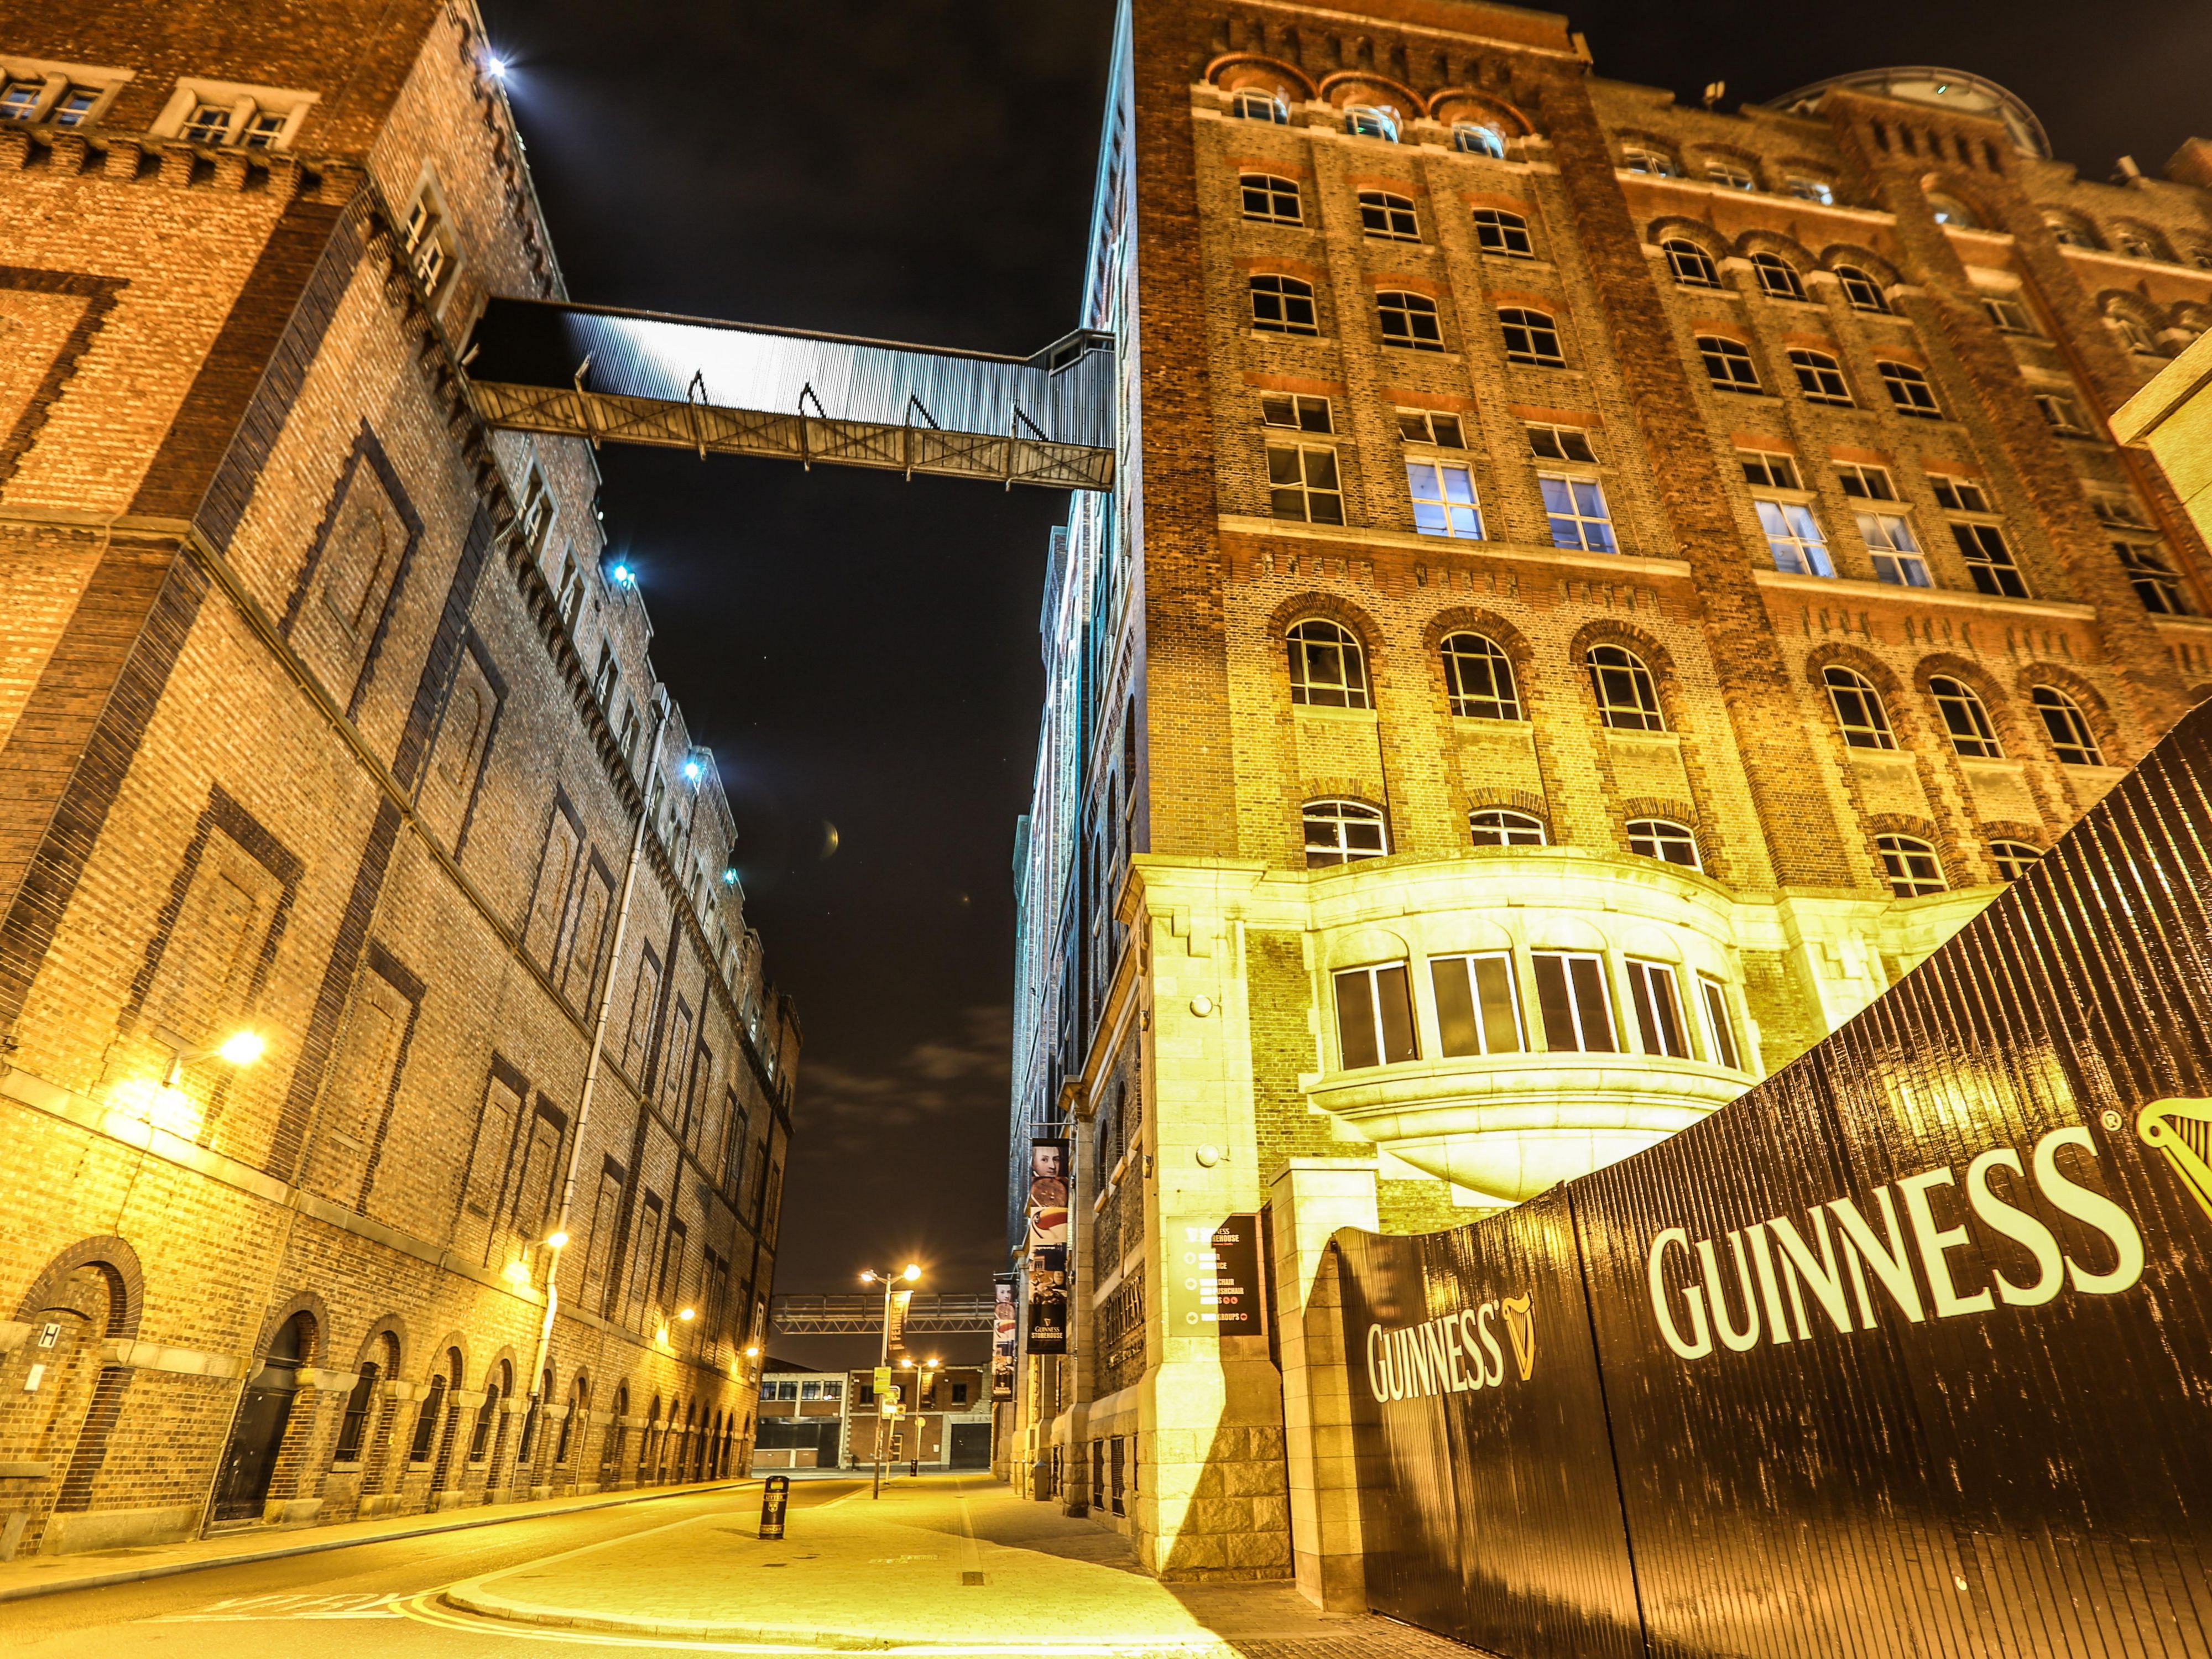 Guinness Storehouse is 30 min walk from the hotel